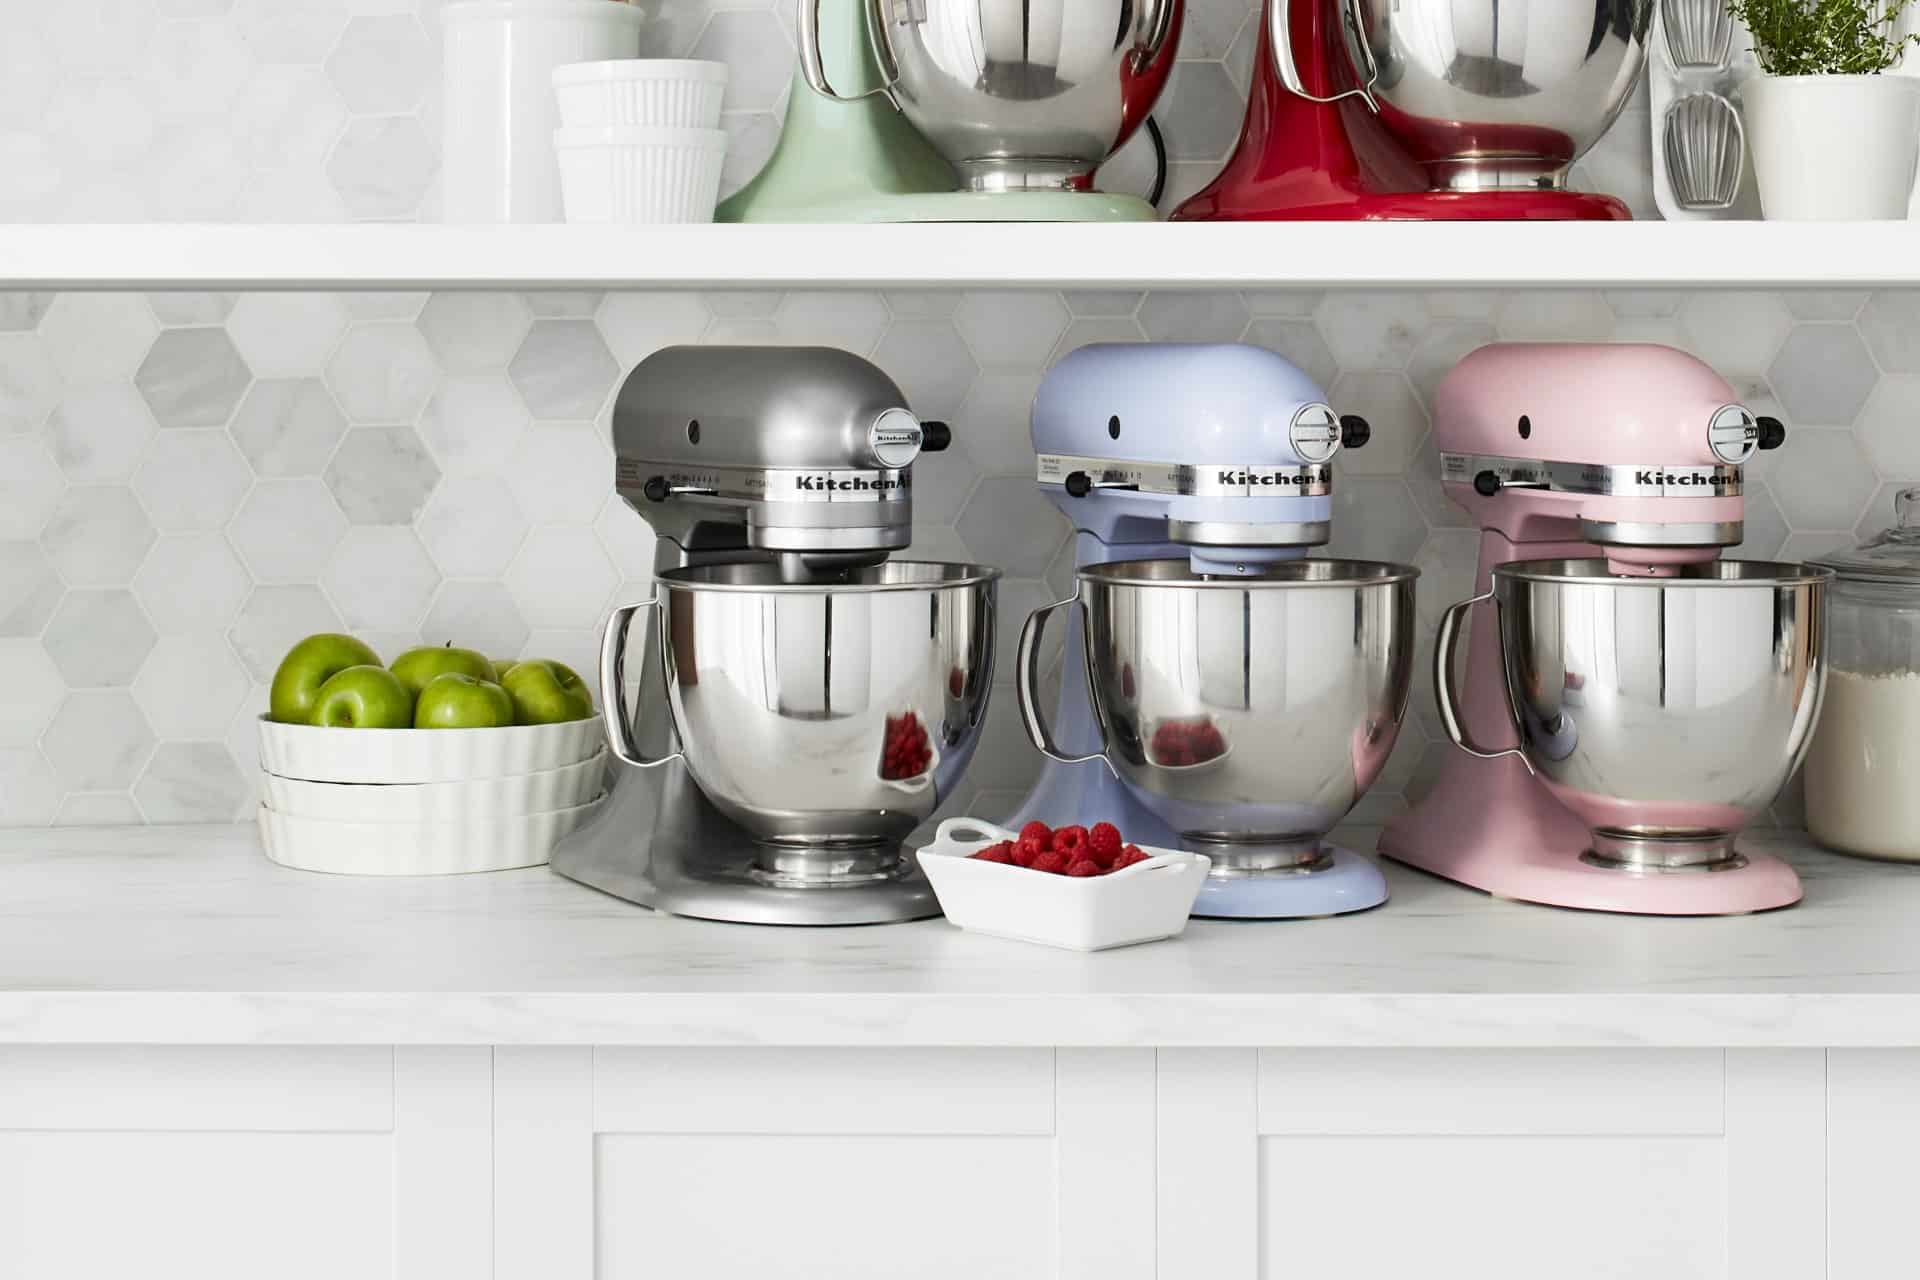 Hand Mixer vs Stand Mixer: What’s the Difference?